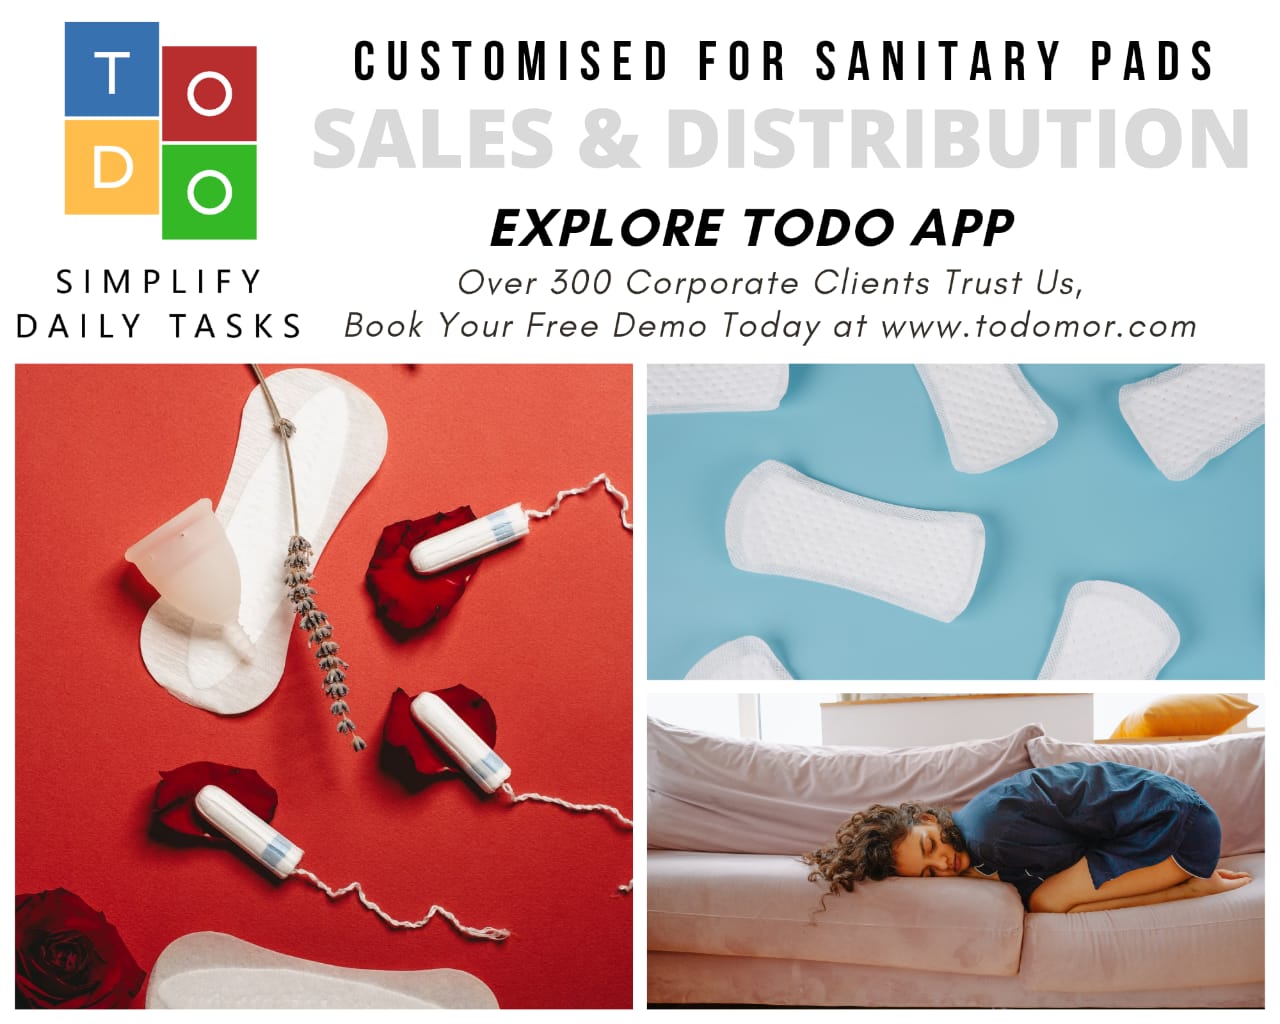 Your commercial sanitary pad: What's in them?